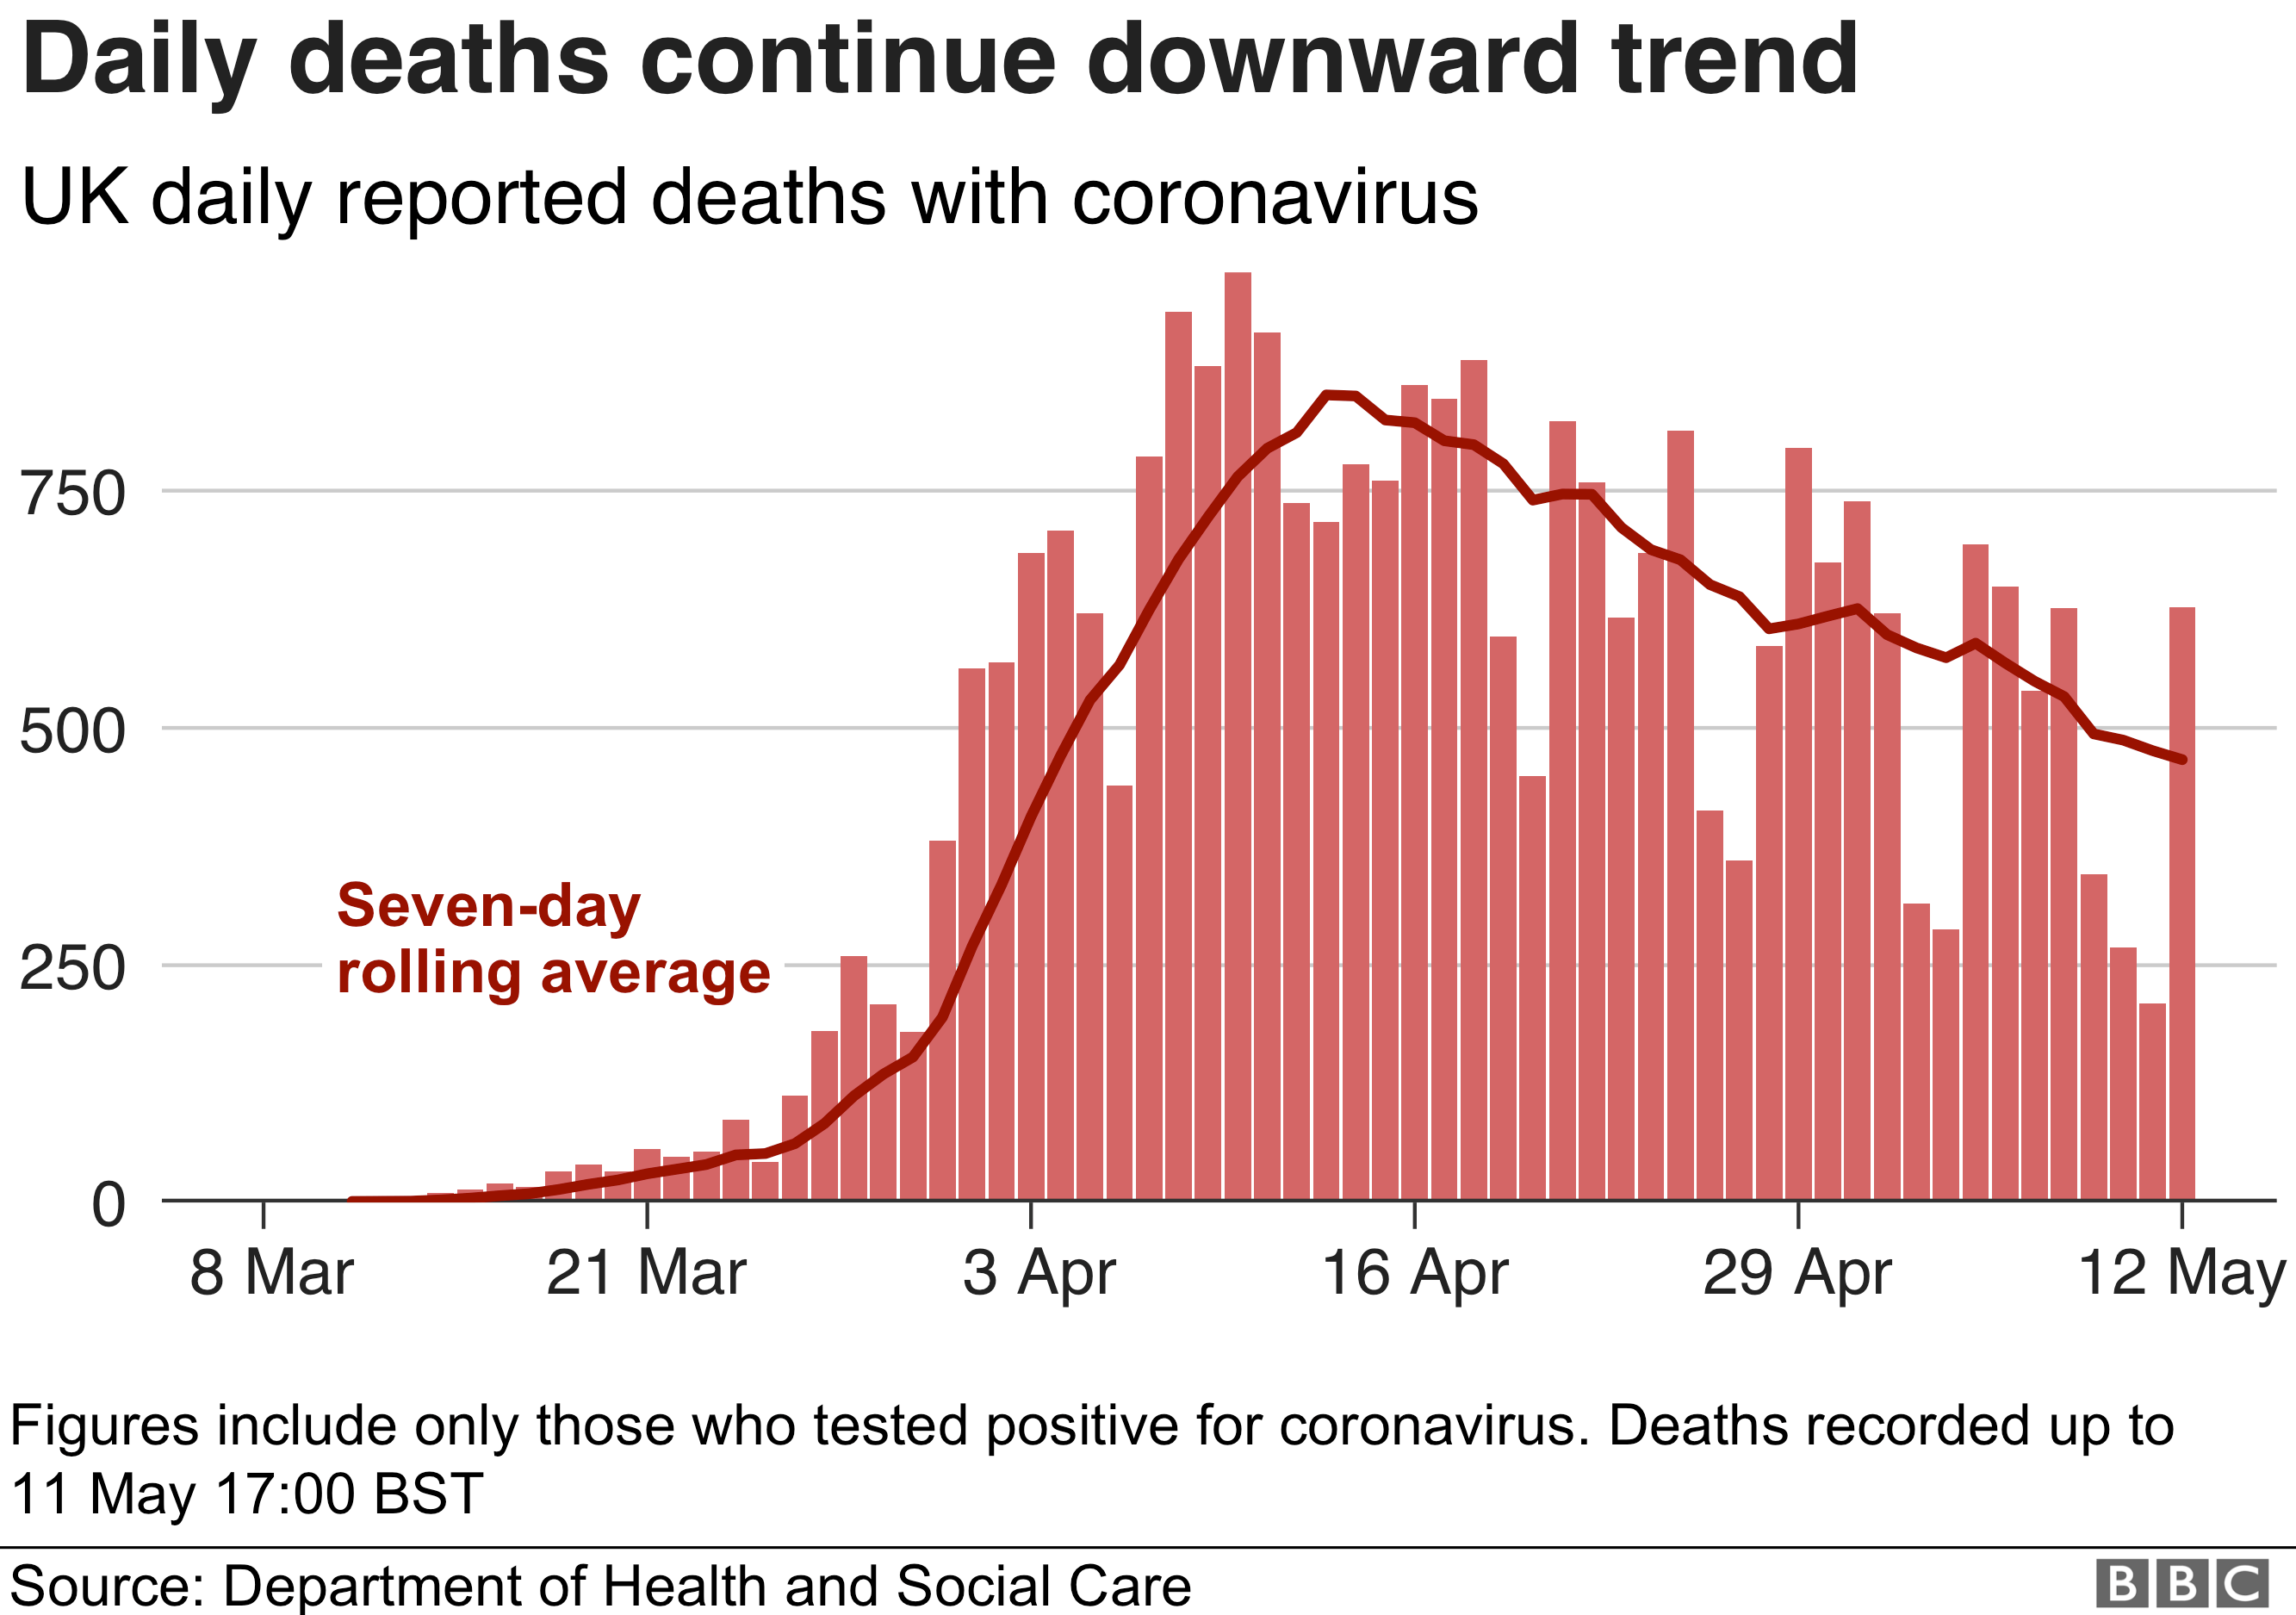 Bar chart showing daily deaths are continuing a downward trend